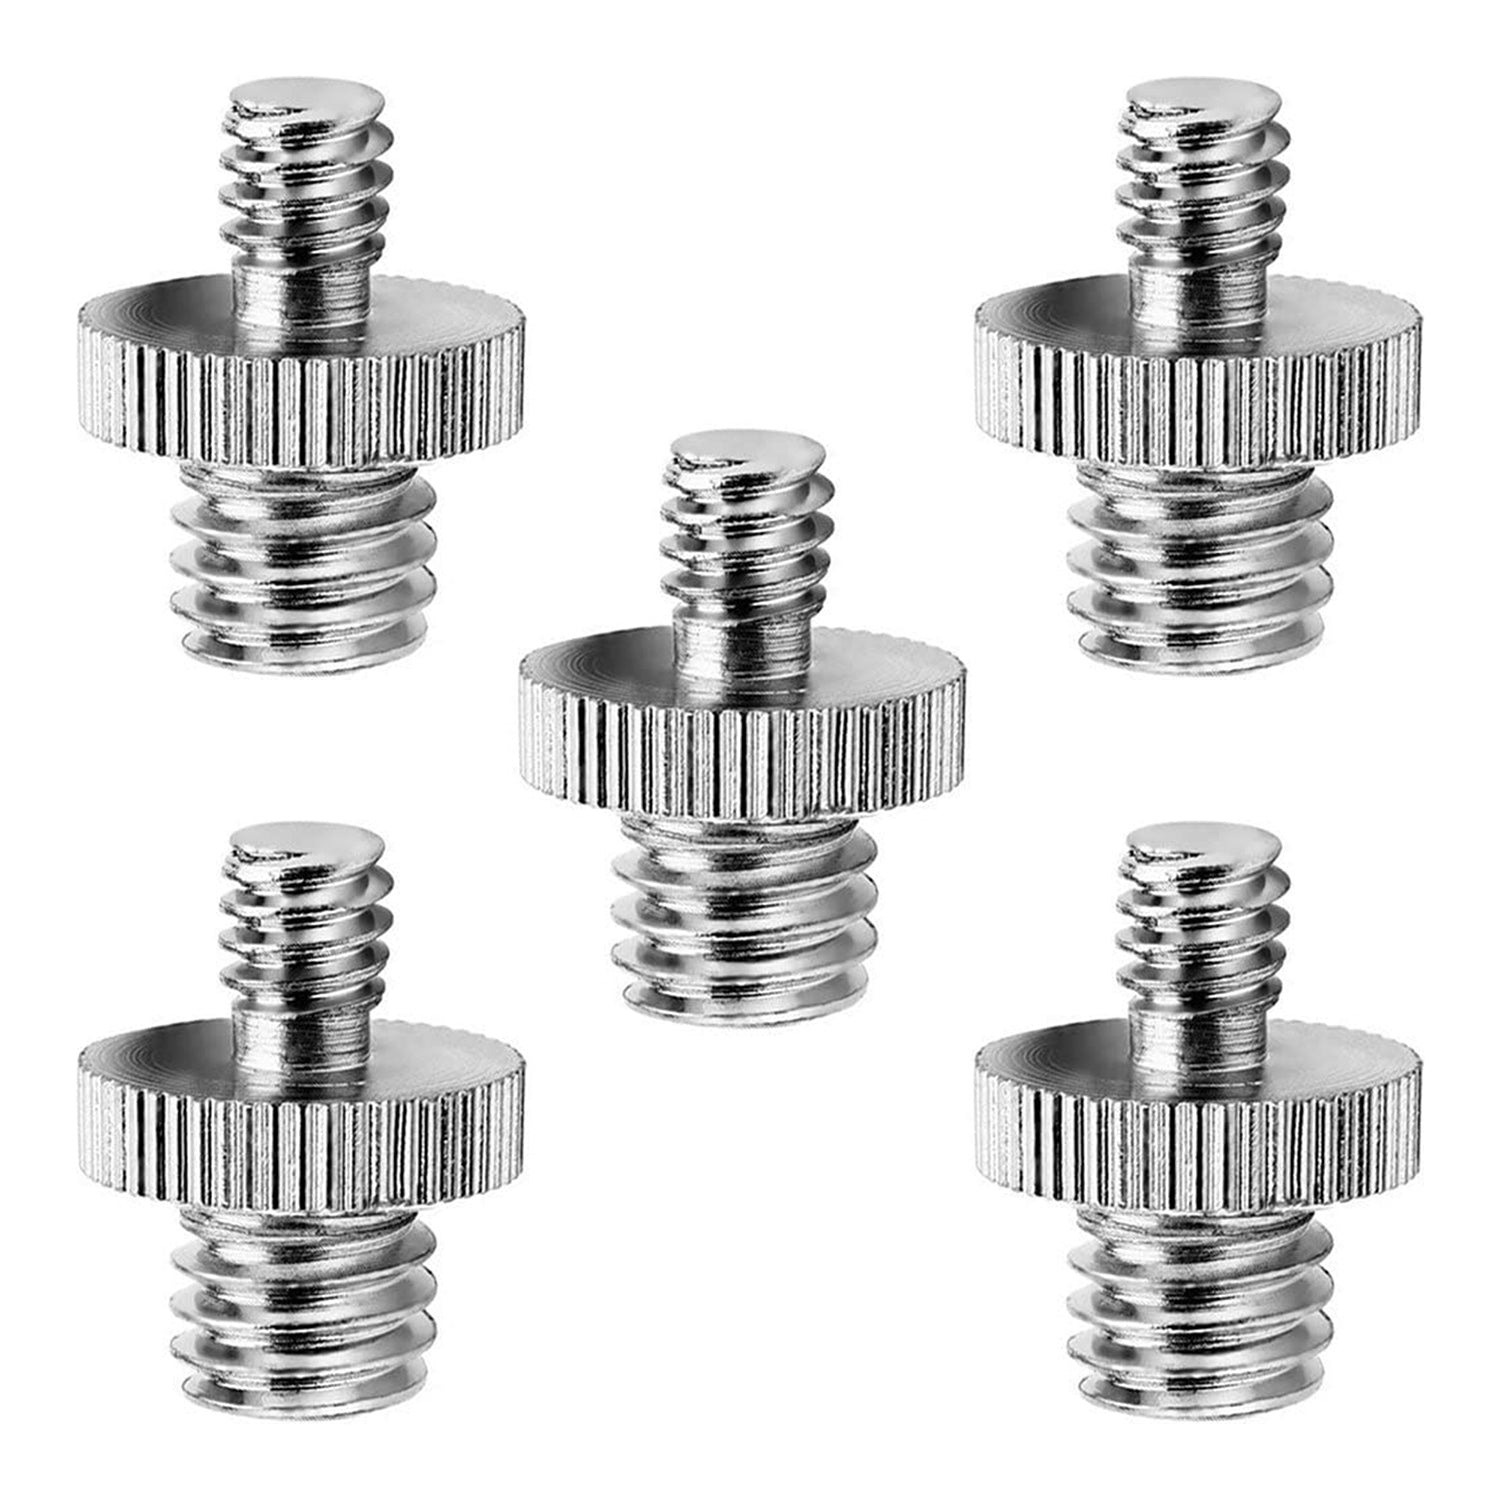 5 Core Mic Stand Adapter 3/8 Male to 1/4 Male Screw Adapter w Knurled Surface Precise Thread Adopter